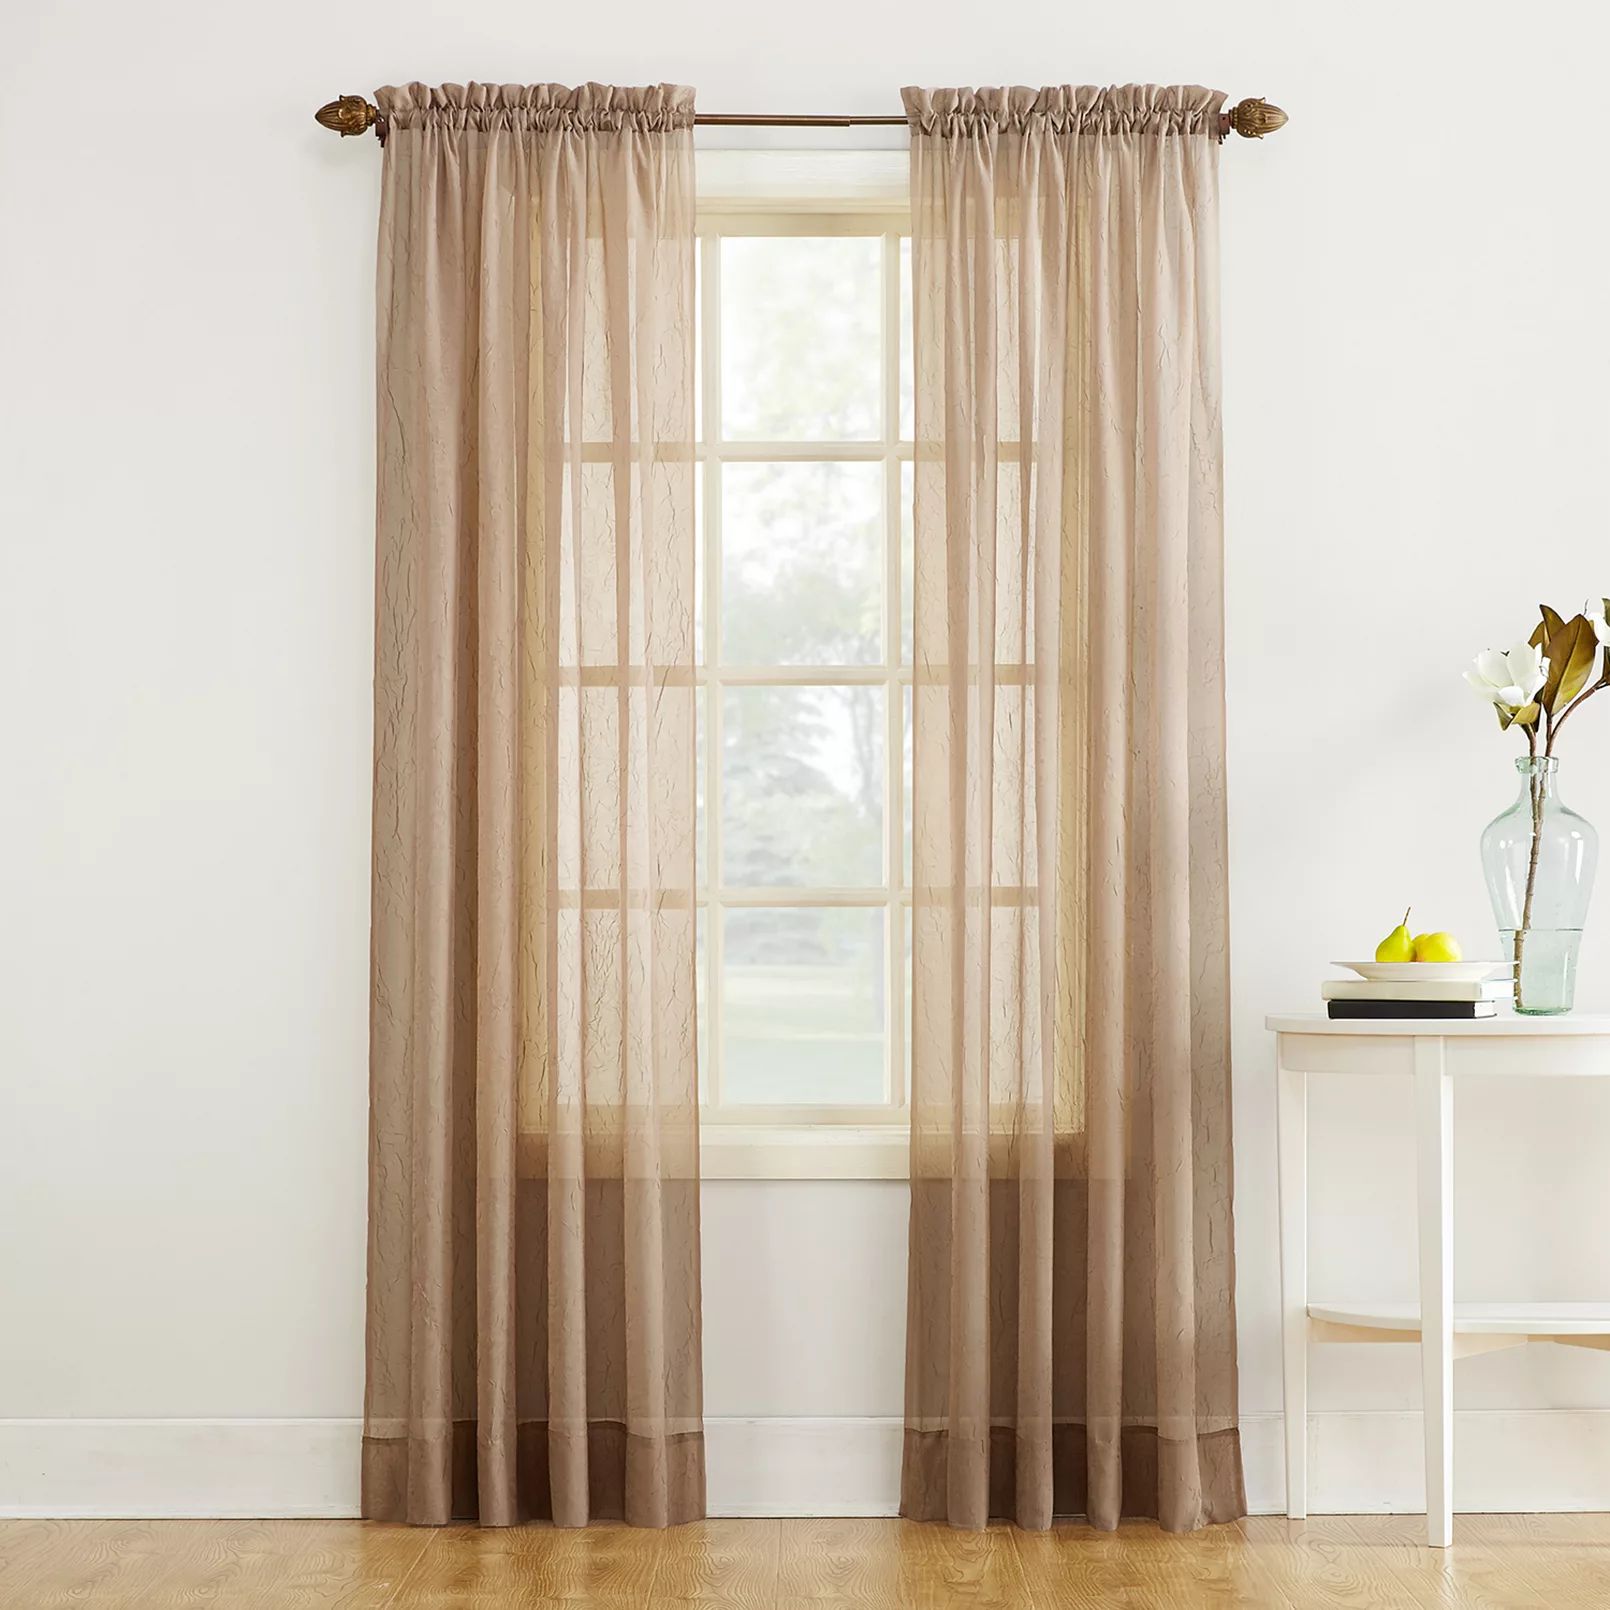 No. 918 Erica Crushed Sheer Voile Window Curtain | Kohl's